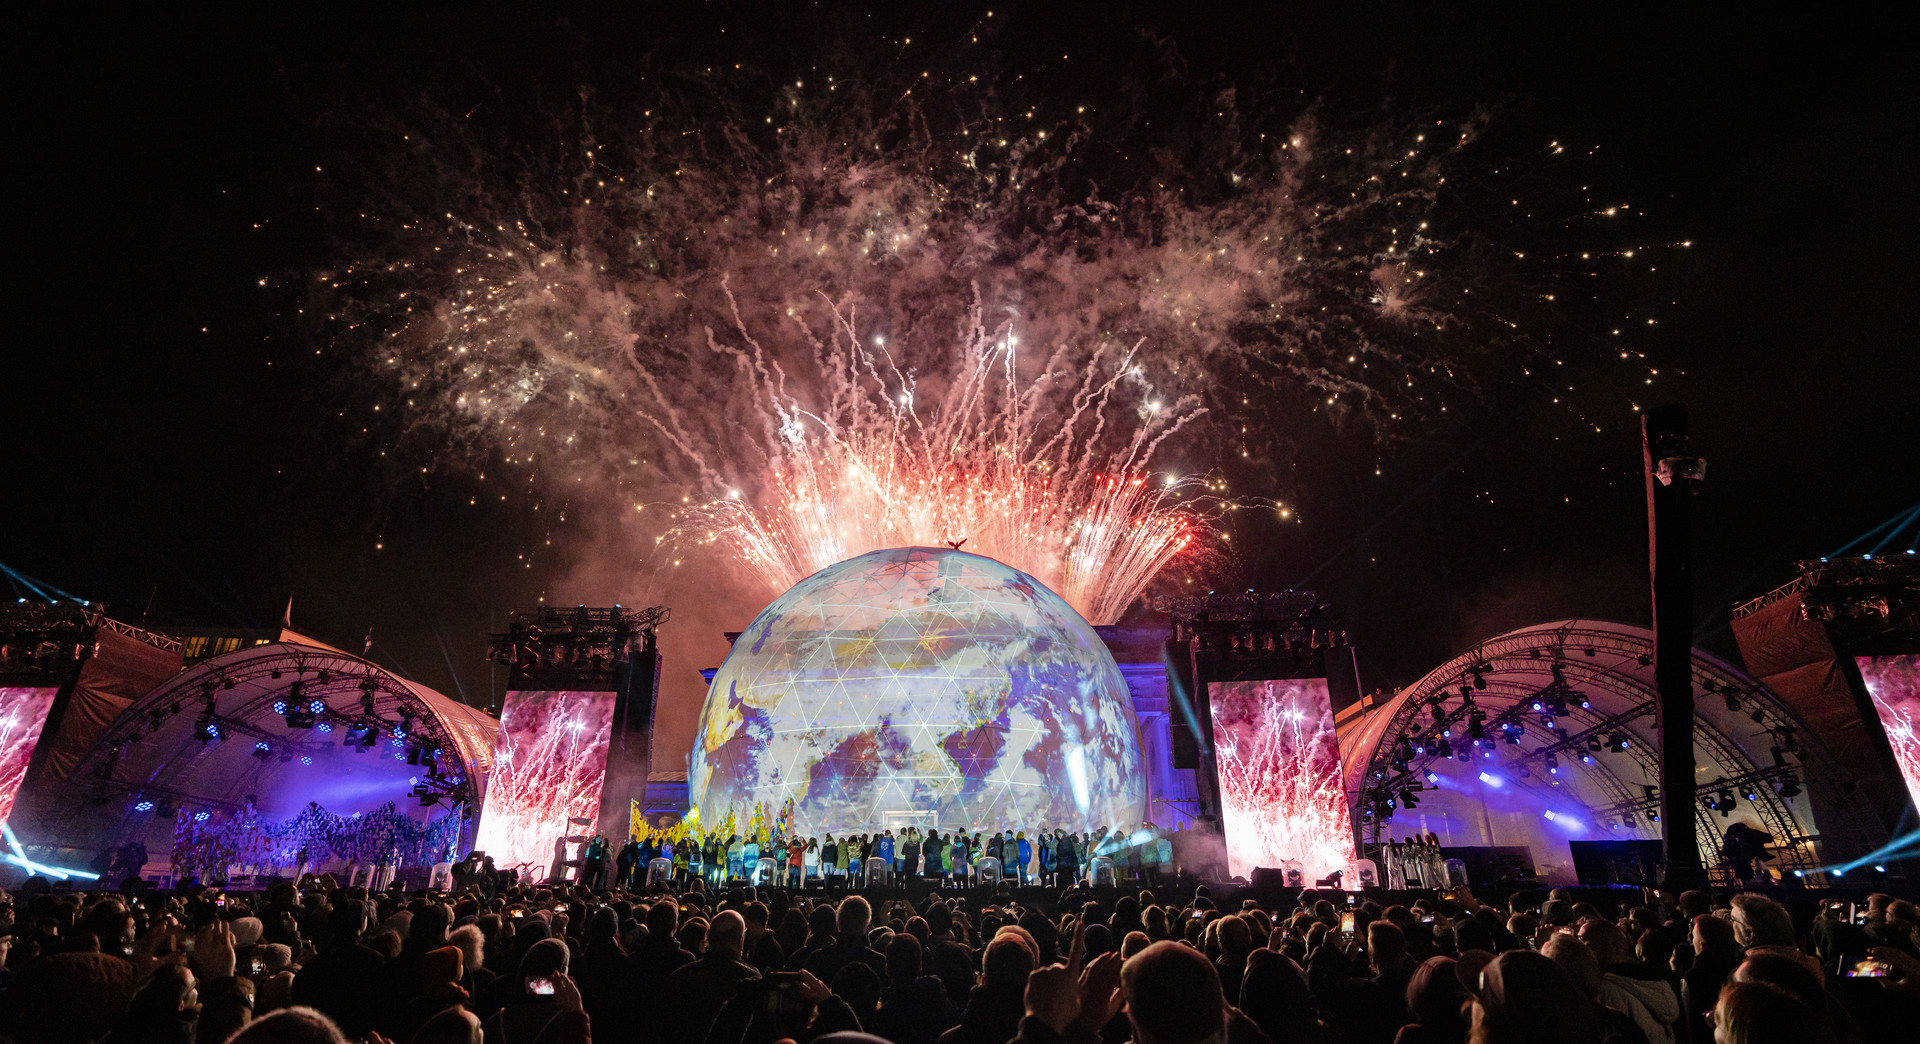 PRG was a part of "30 years since the Berlin Wall fell"-Event in Berlin with a crew of 180, providing the 360° full event technology services, including rigging, lighting, video, audio as well as broadcast and communication technology.